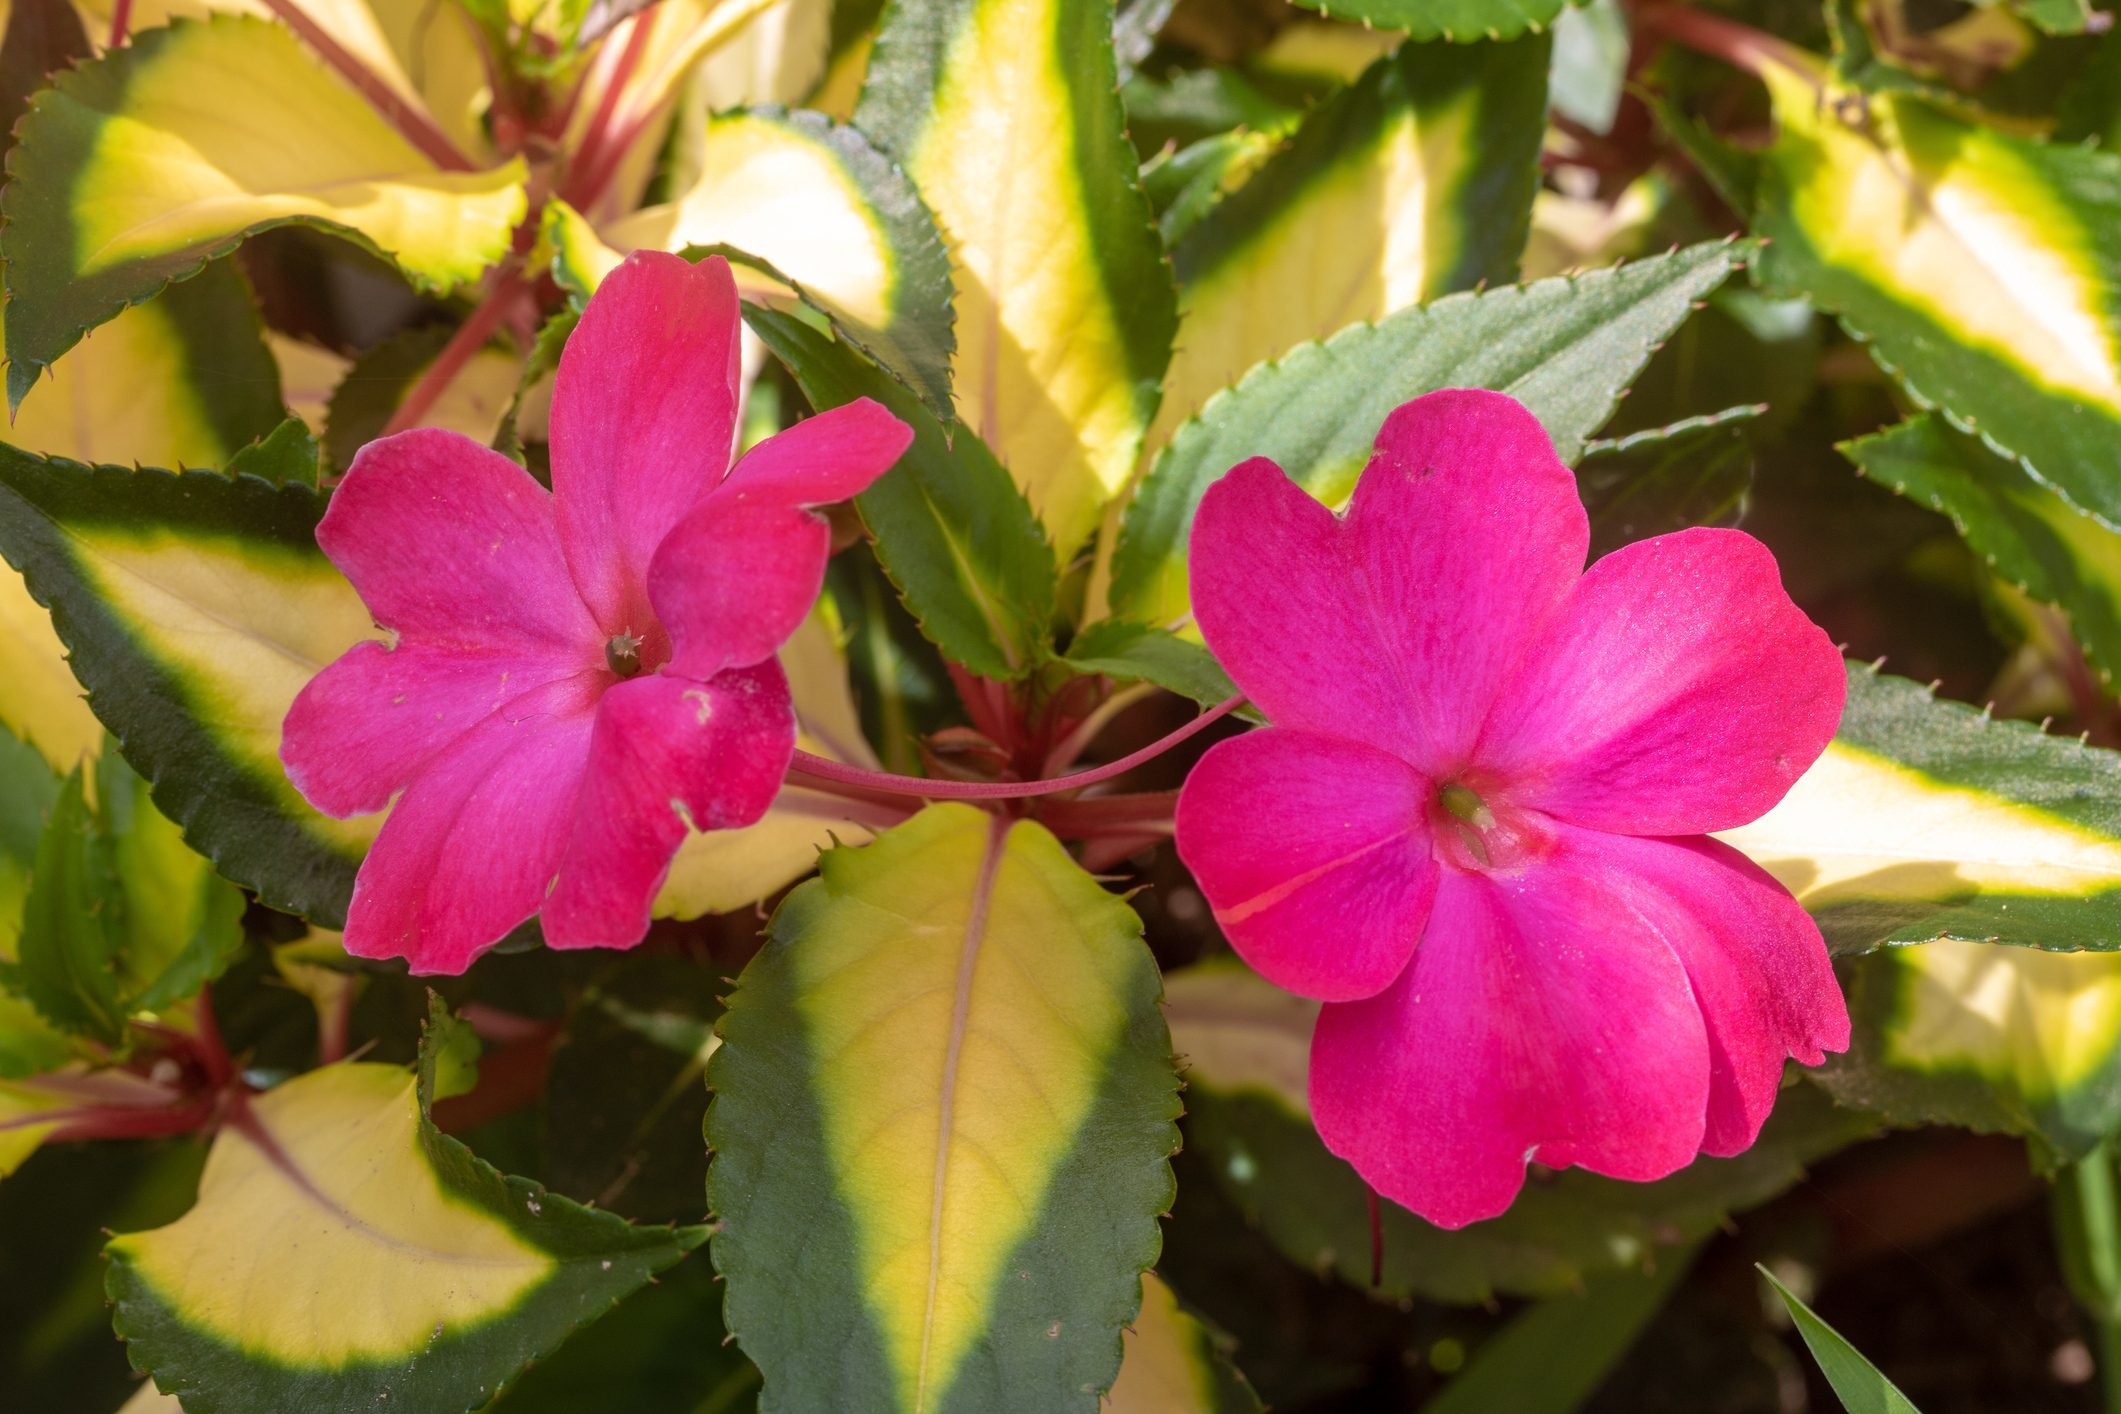 Pink flowering plant with yellow and green leaves